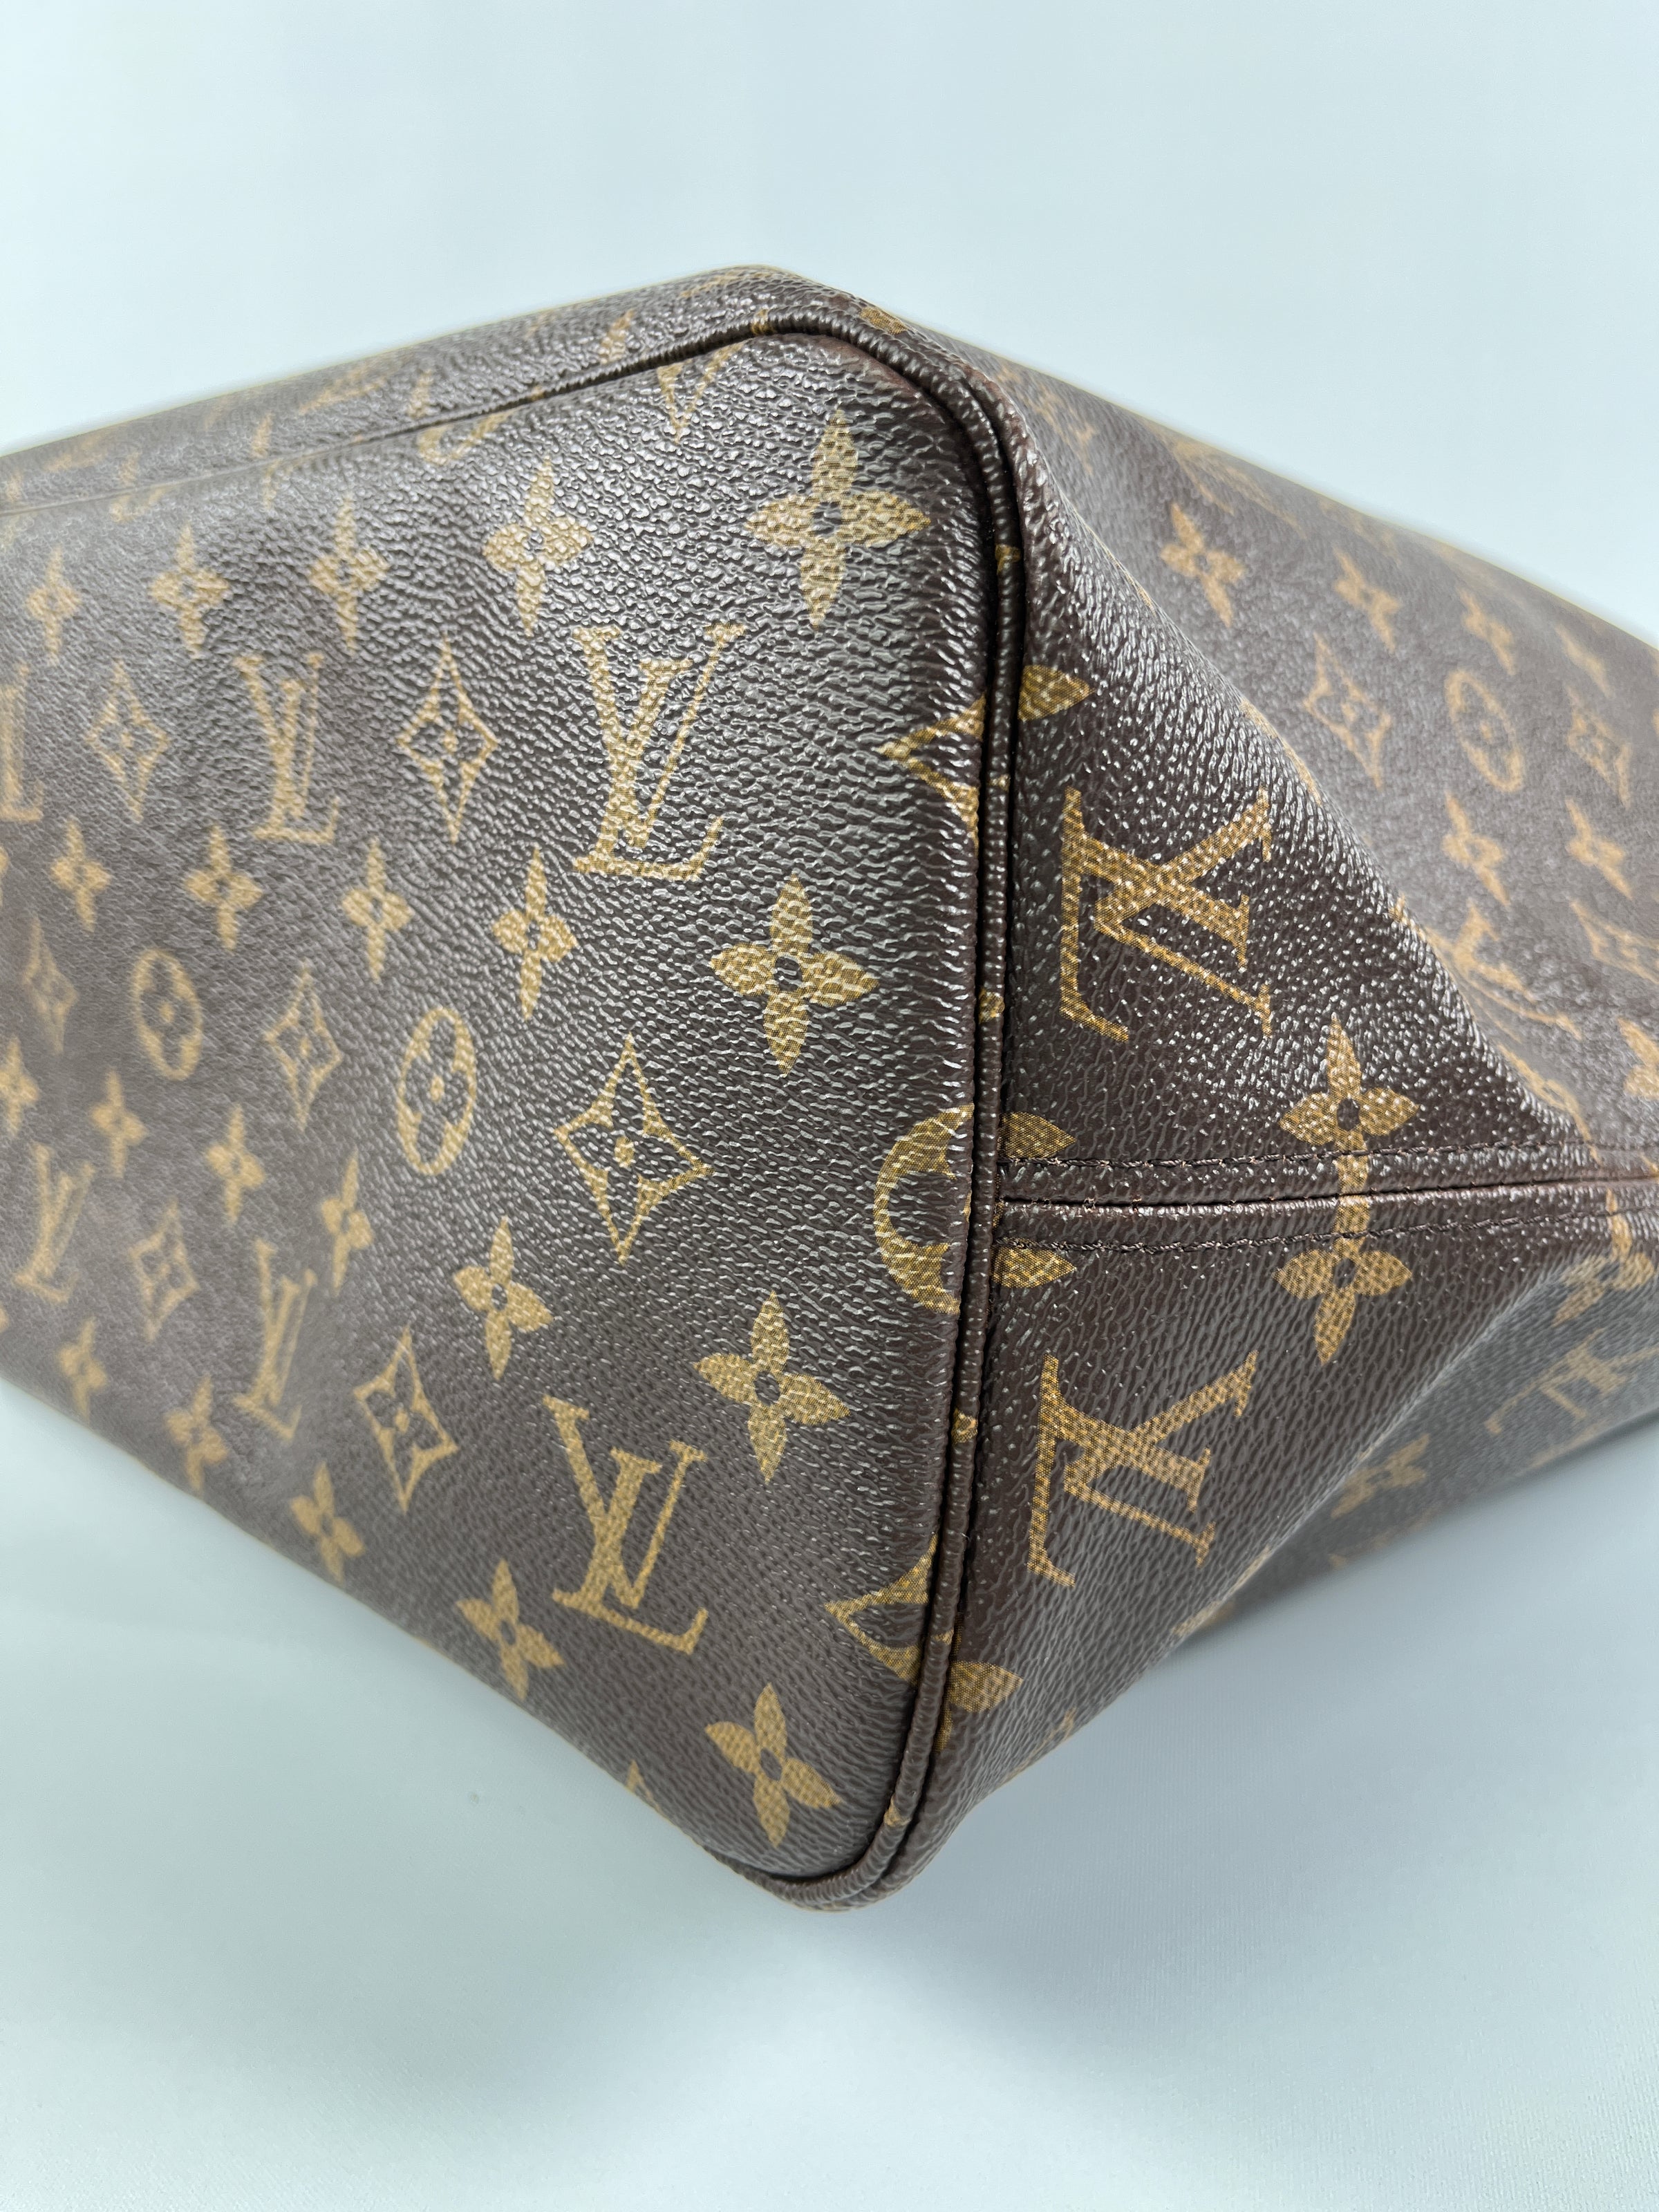 LOUIS VUITTON - NEVERFULL MM TOTE IN MONOGRAM WITH BEIGE INTERIOR – RE.LUXE  AU